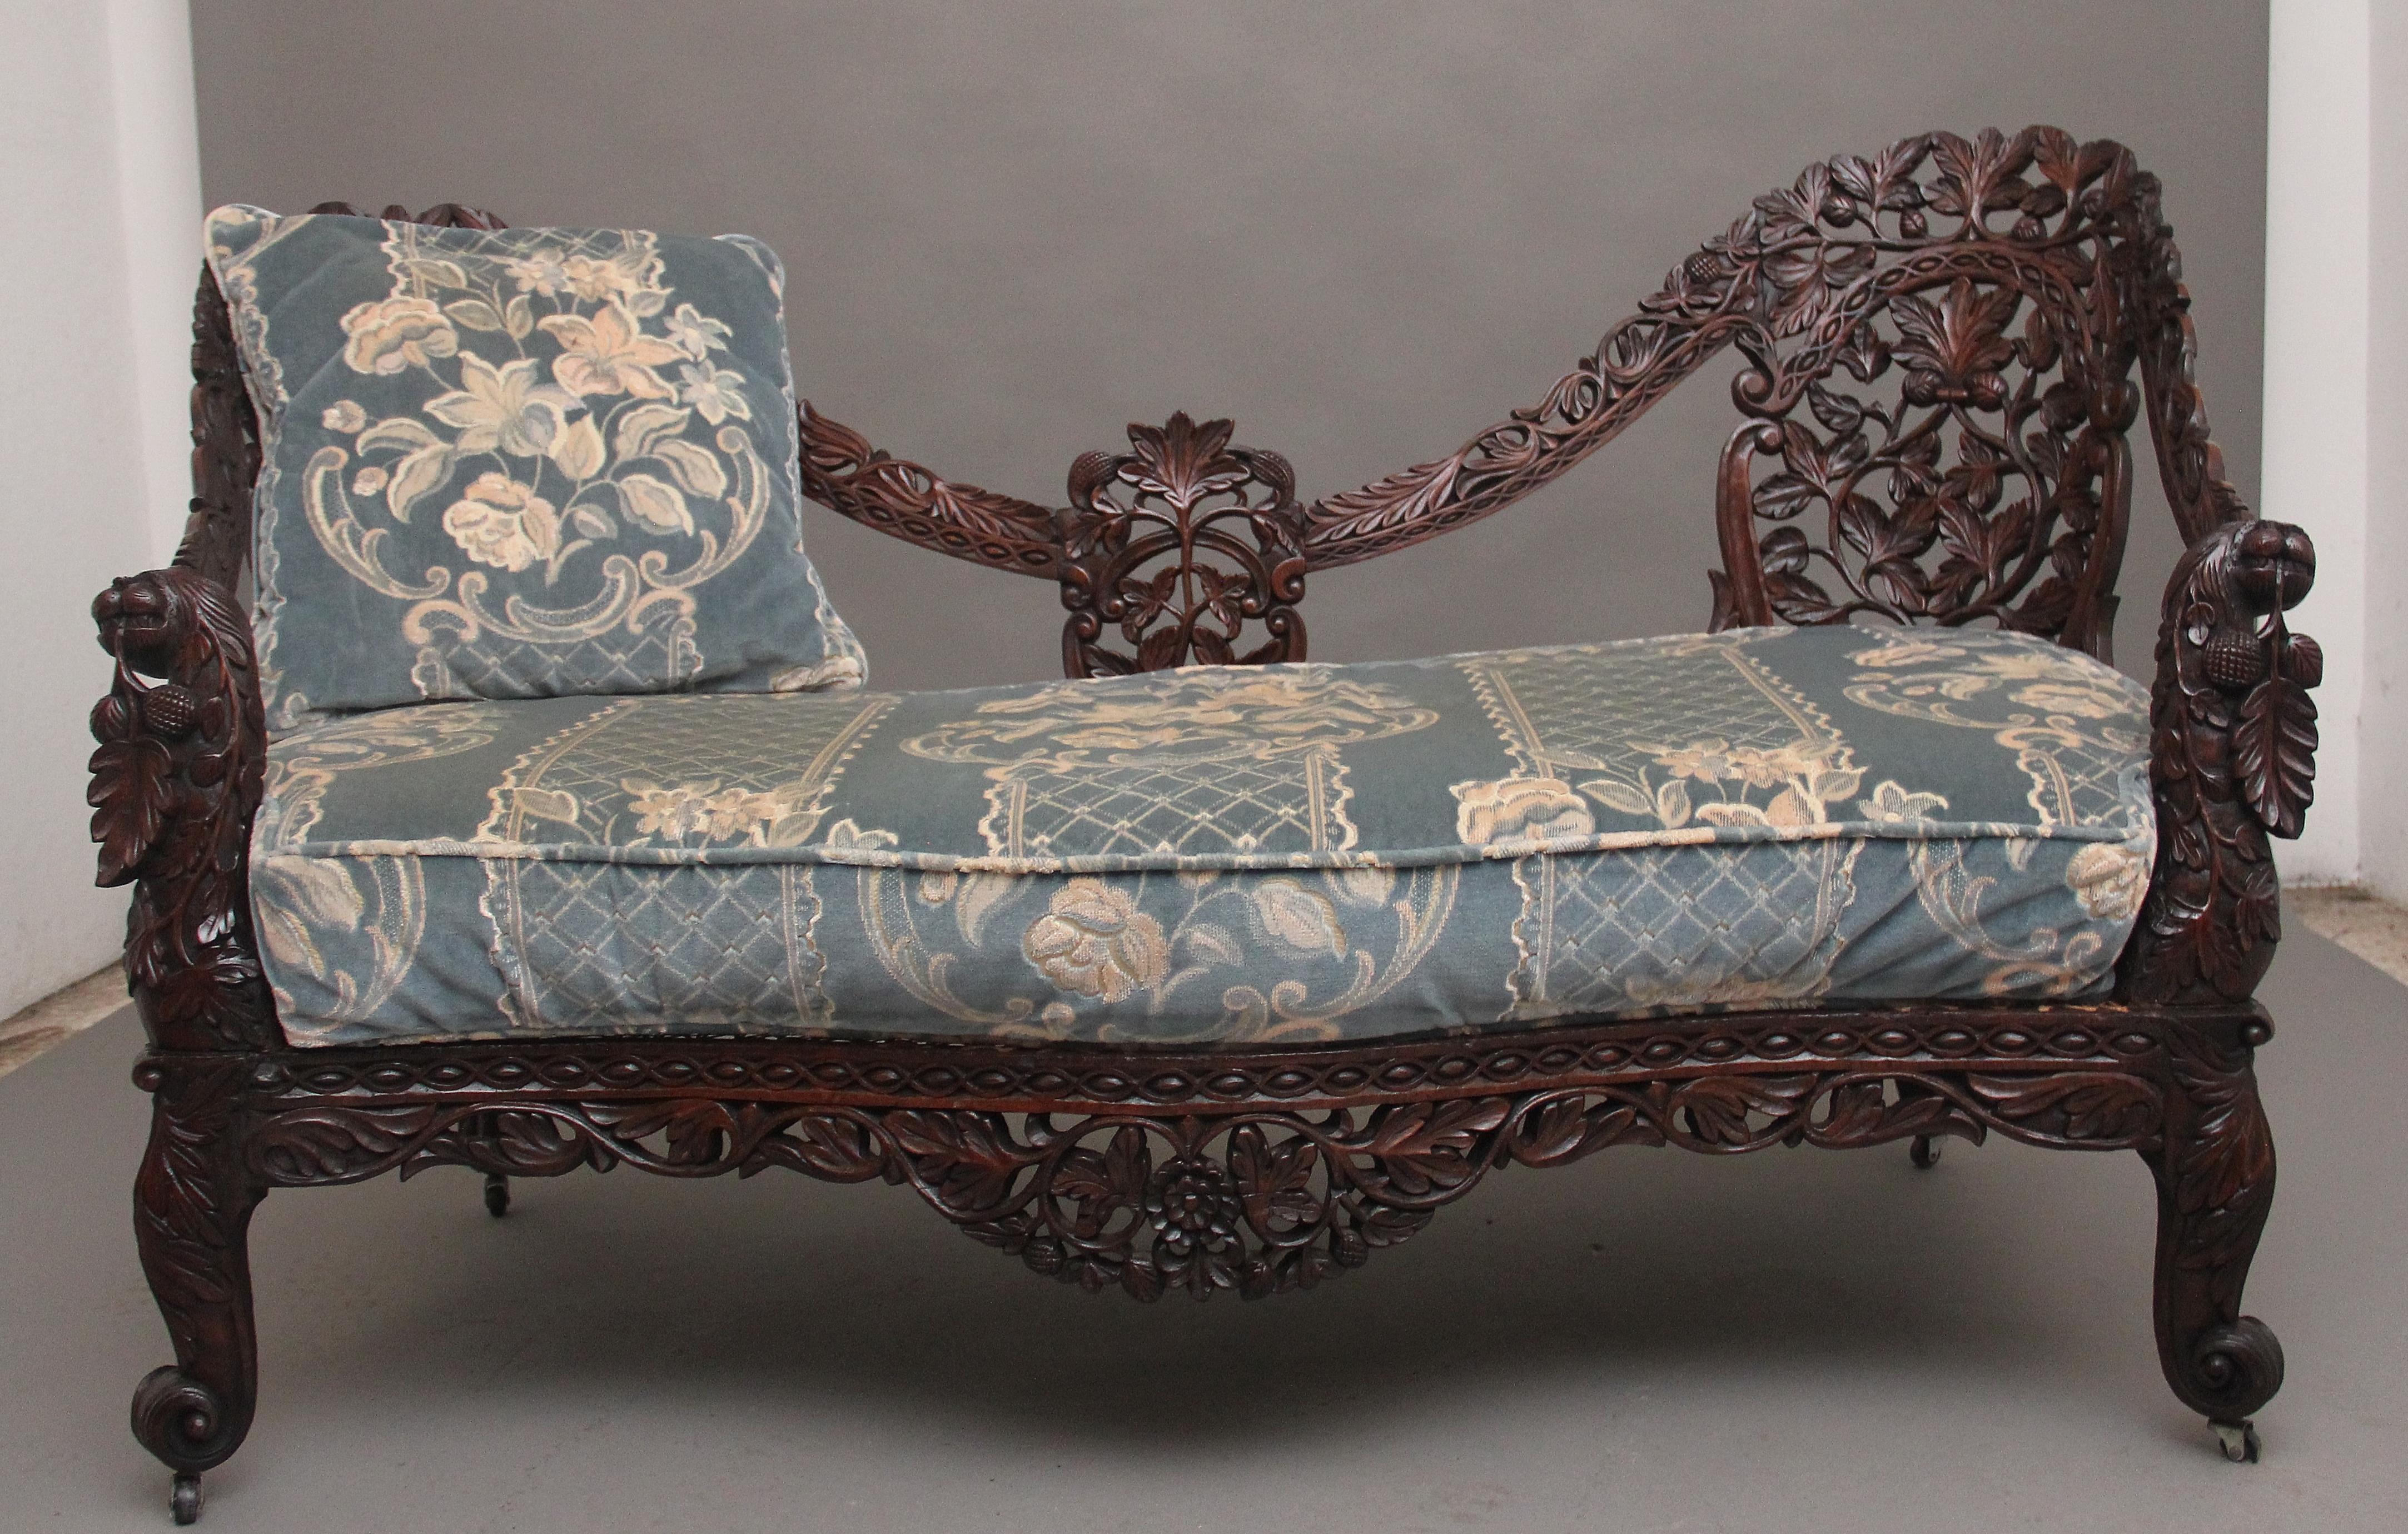 A superb quality 19th Century Anglo Indian carved sofa, the shaped back profusely carved with various foliage, the frame connecting down to the highly carved and decorative front supports incorporating mythical figure heads at each side, having a